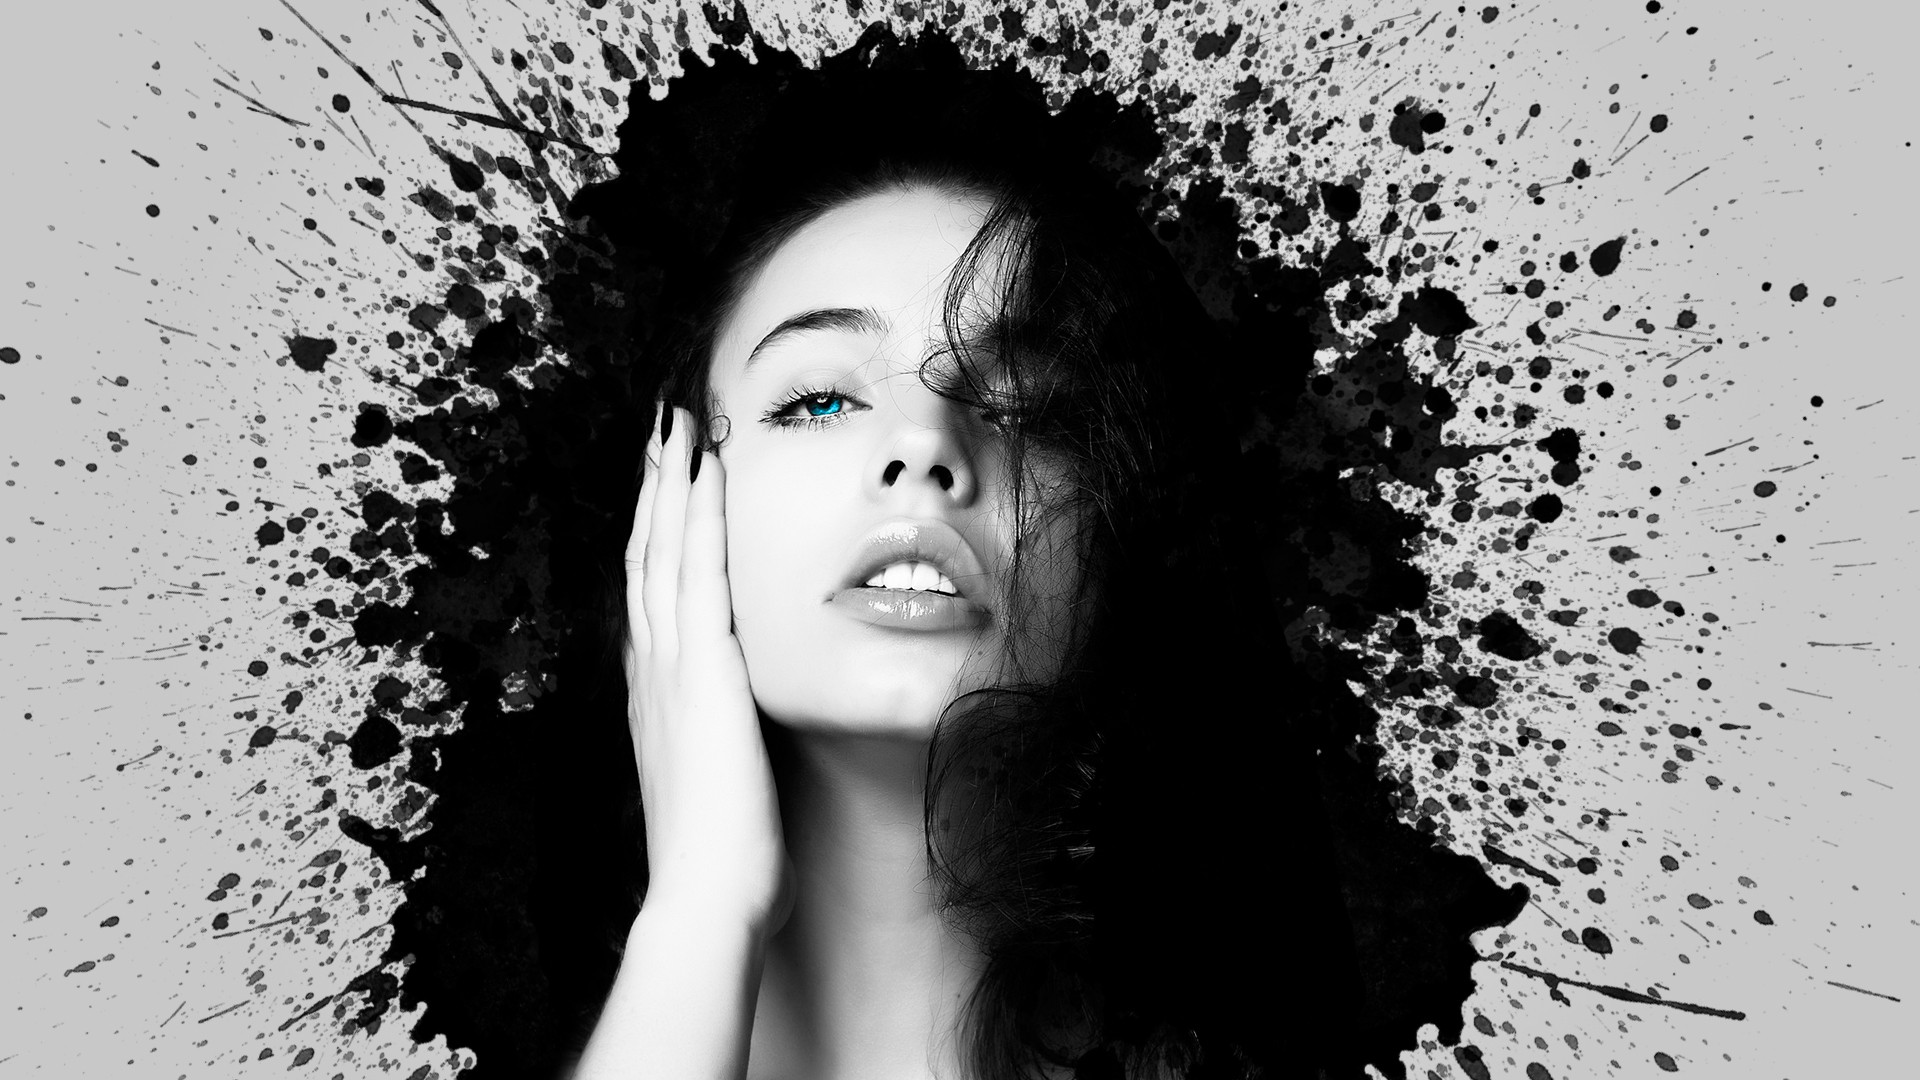 Paint Splatter Photo Manipulation Face Eyes Lips Selective Coloring Blue Eyes Open Mouth Women Hand  1920x1080